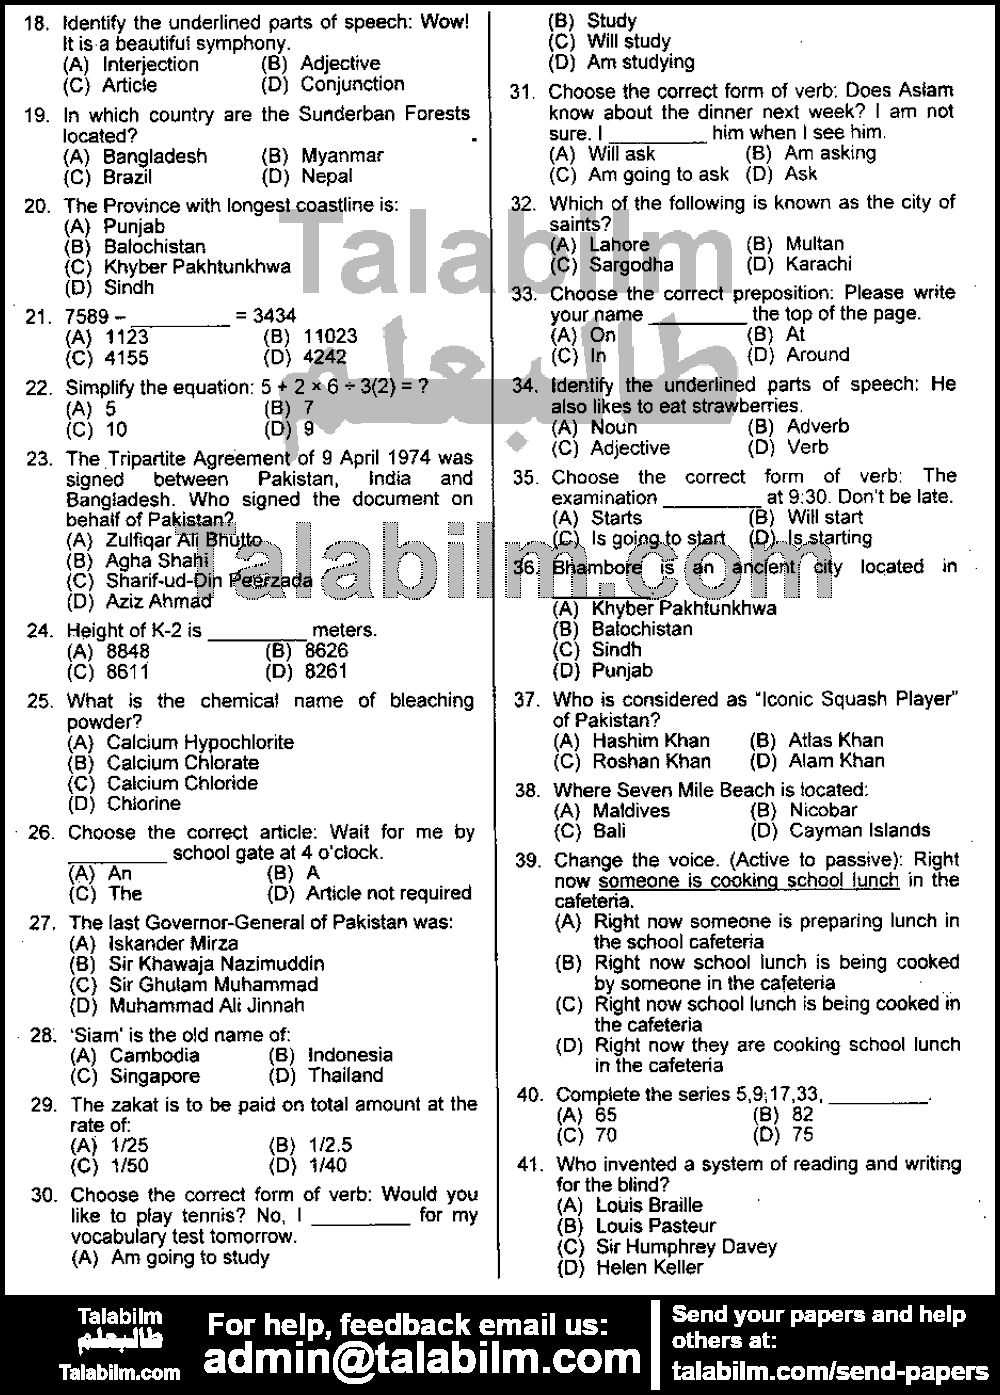 General Elementary School Educator 0 past paper for 2019 Afternoon Paper Page No. 2